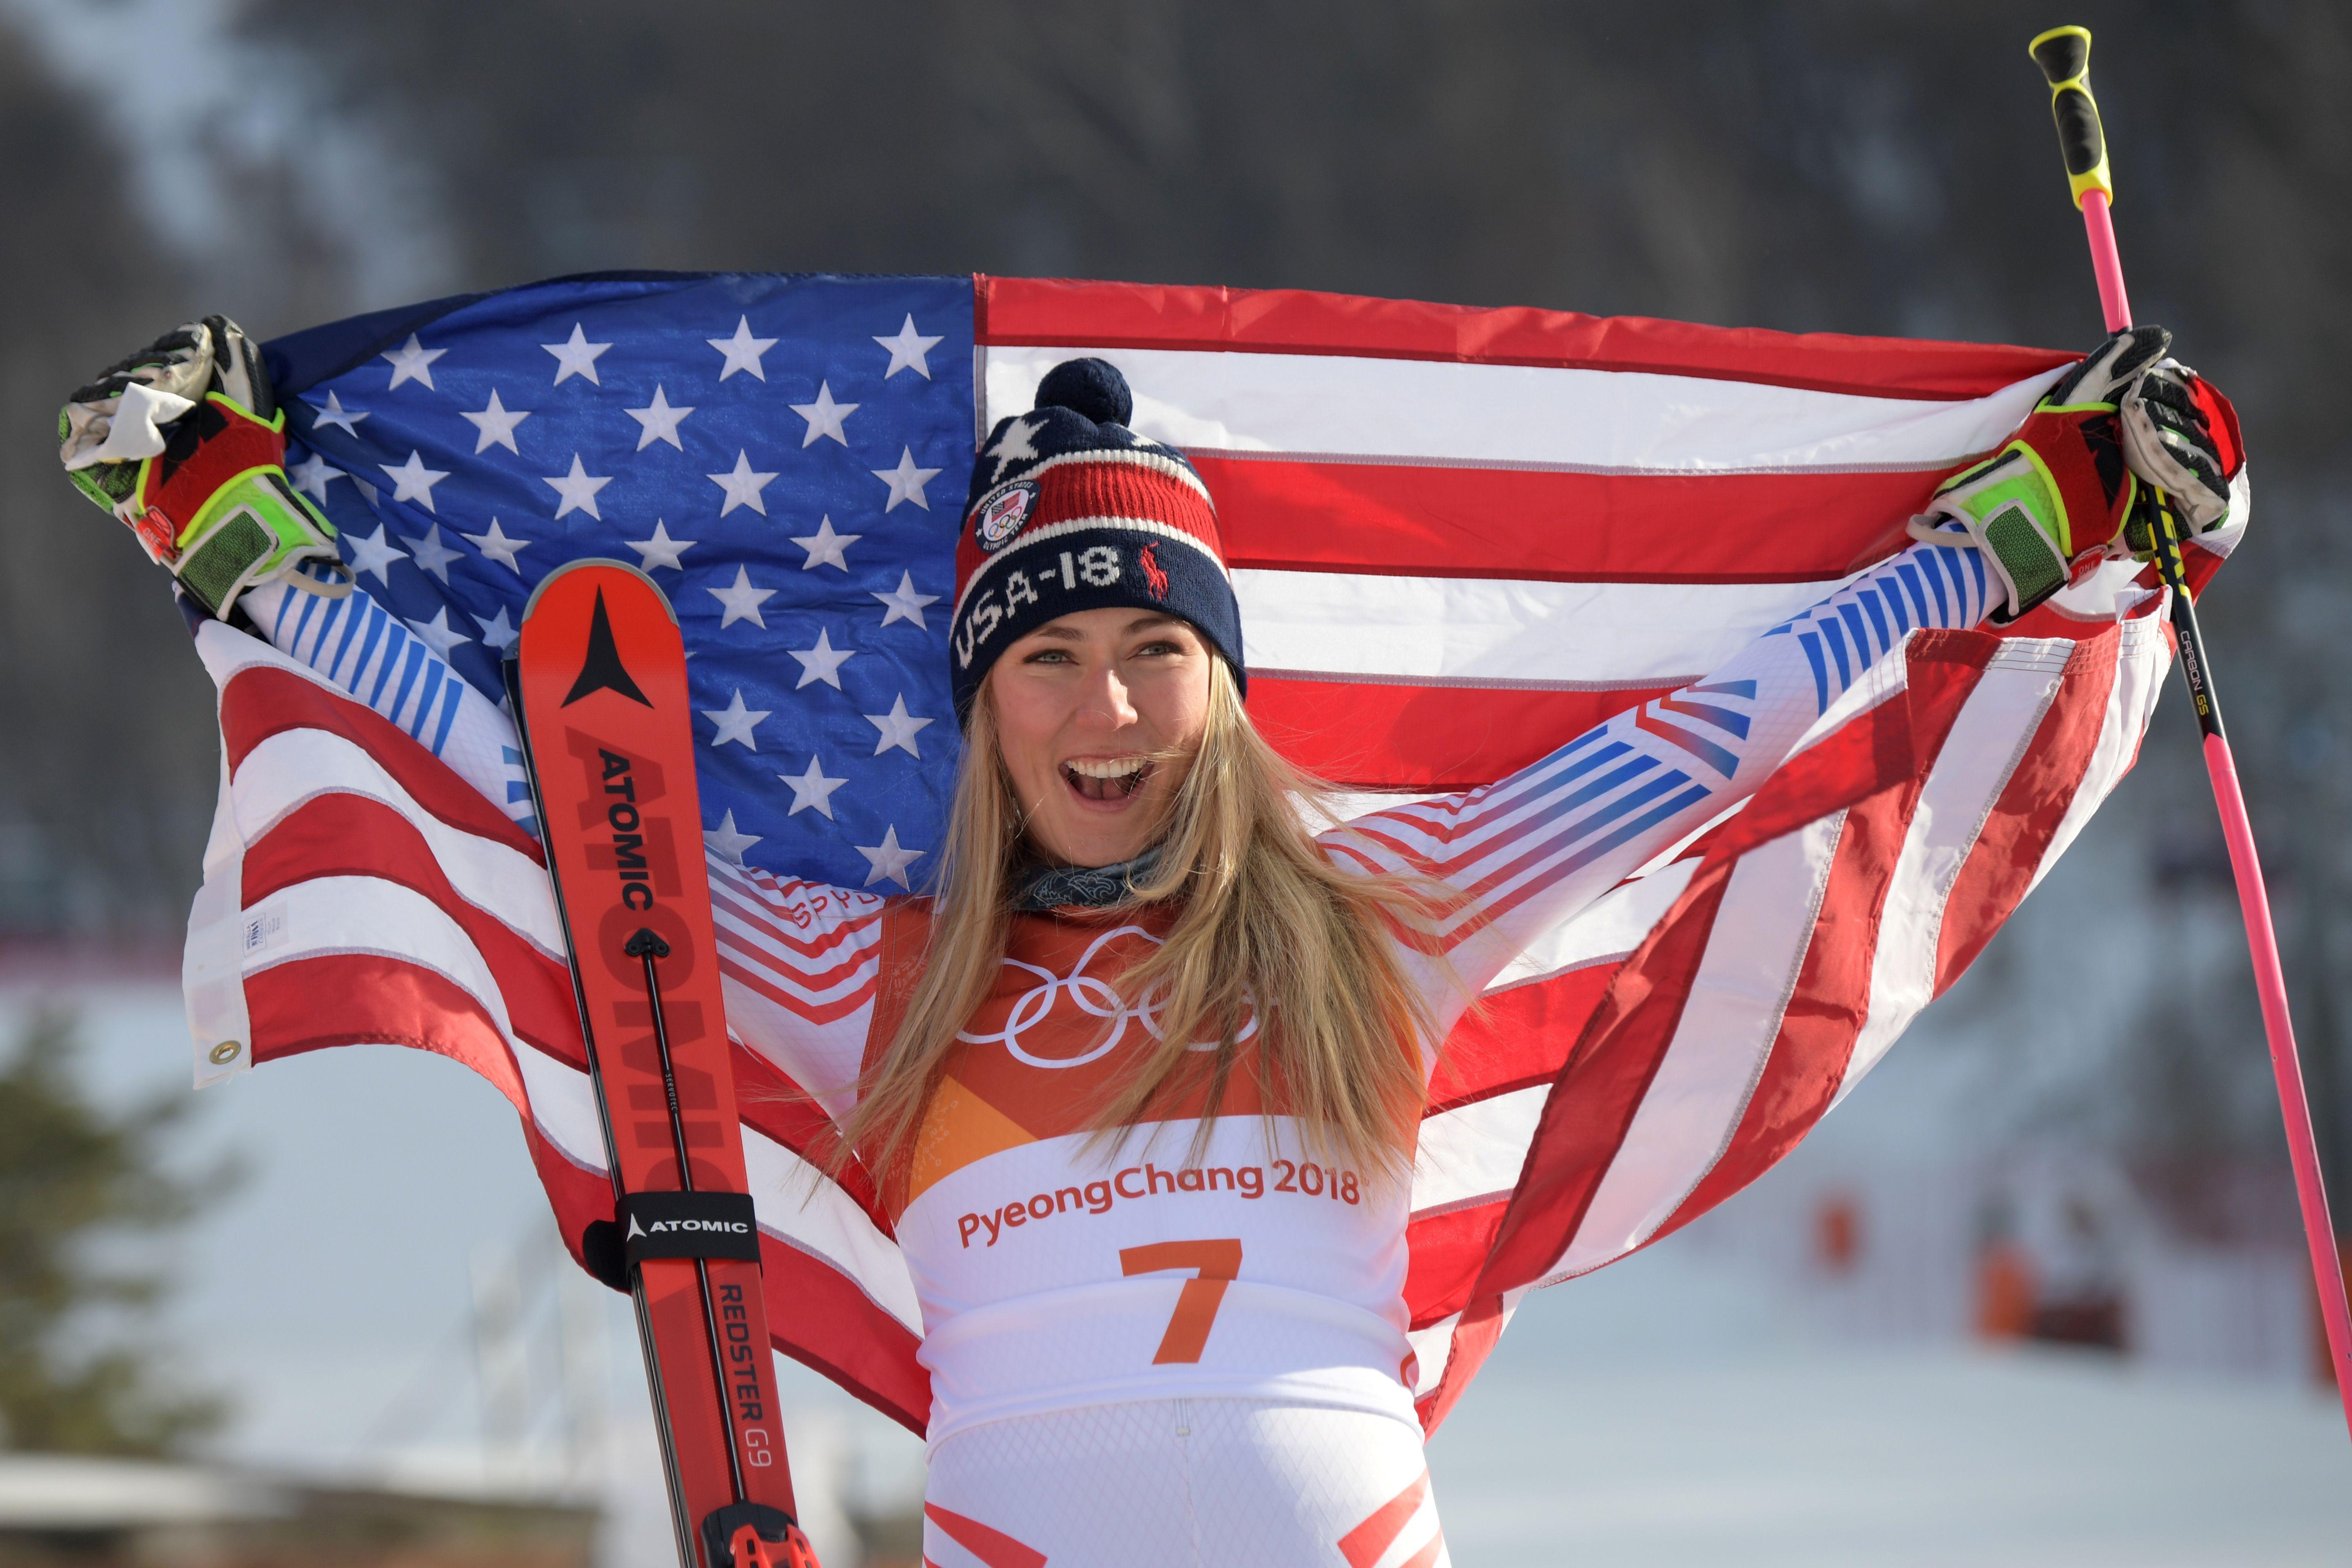 USA's winner Mikaela Shiffrin poses on the podium during the victory ceremony for the women's Giant Slalom at the Yongpyong Alpine Centre during the Pyeongchang 2018 Winter Olympic Games in Pyeongchang on February 15, 2018. / AFP PHOTO / Martin BERNETTI        (Photo credit should read MARTIN BERNETTI/AFP/Getty Images)